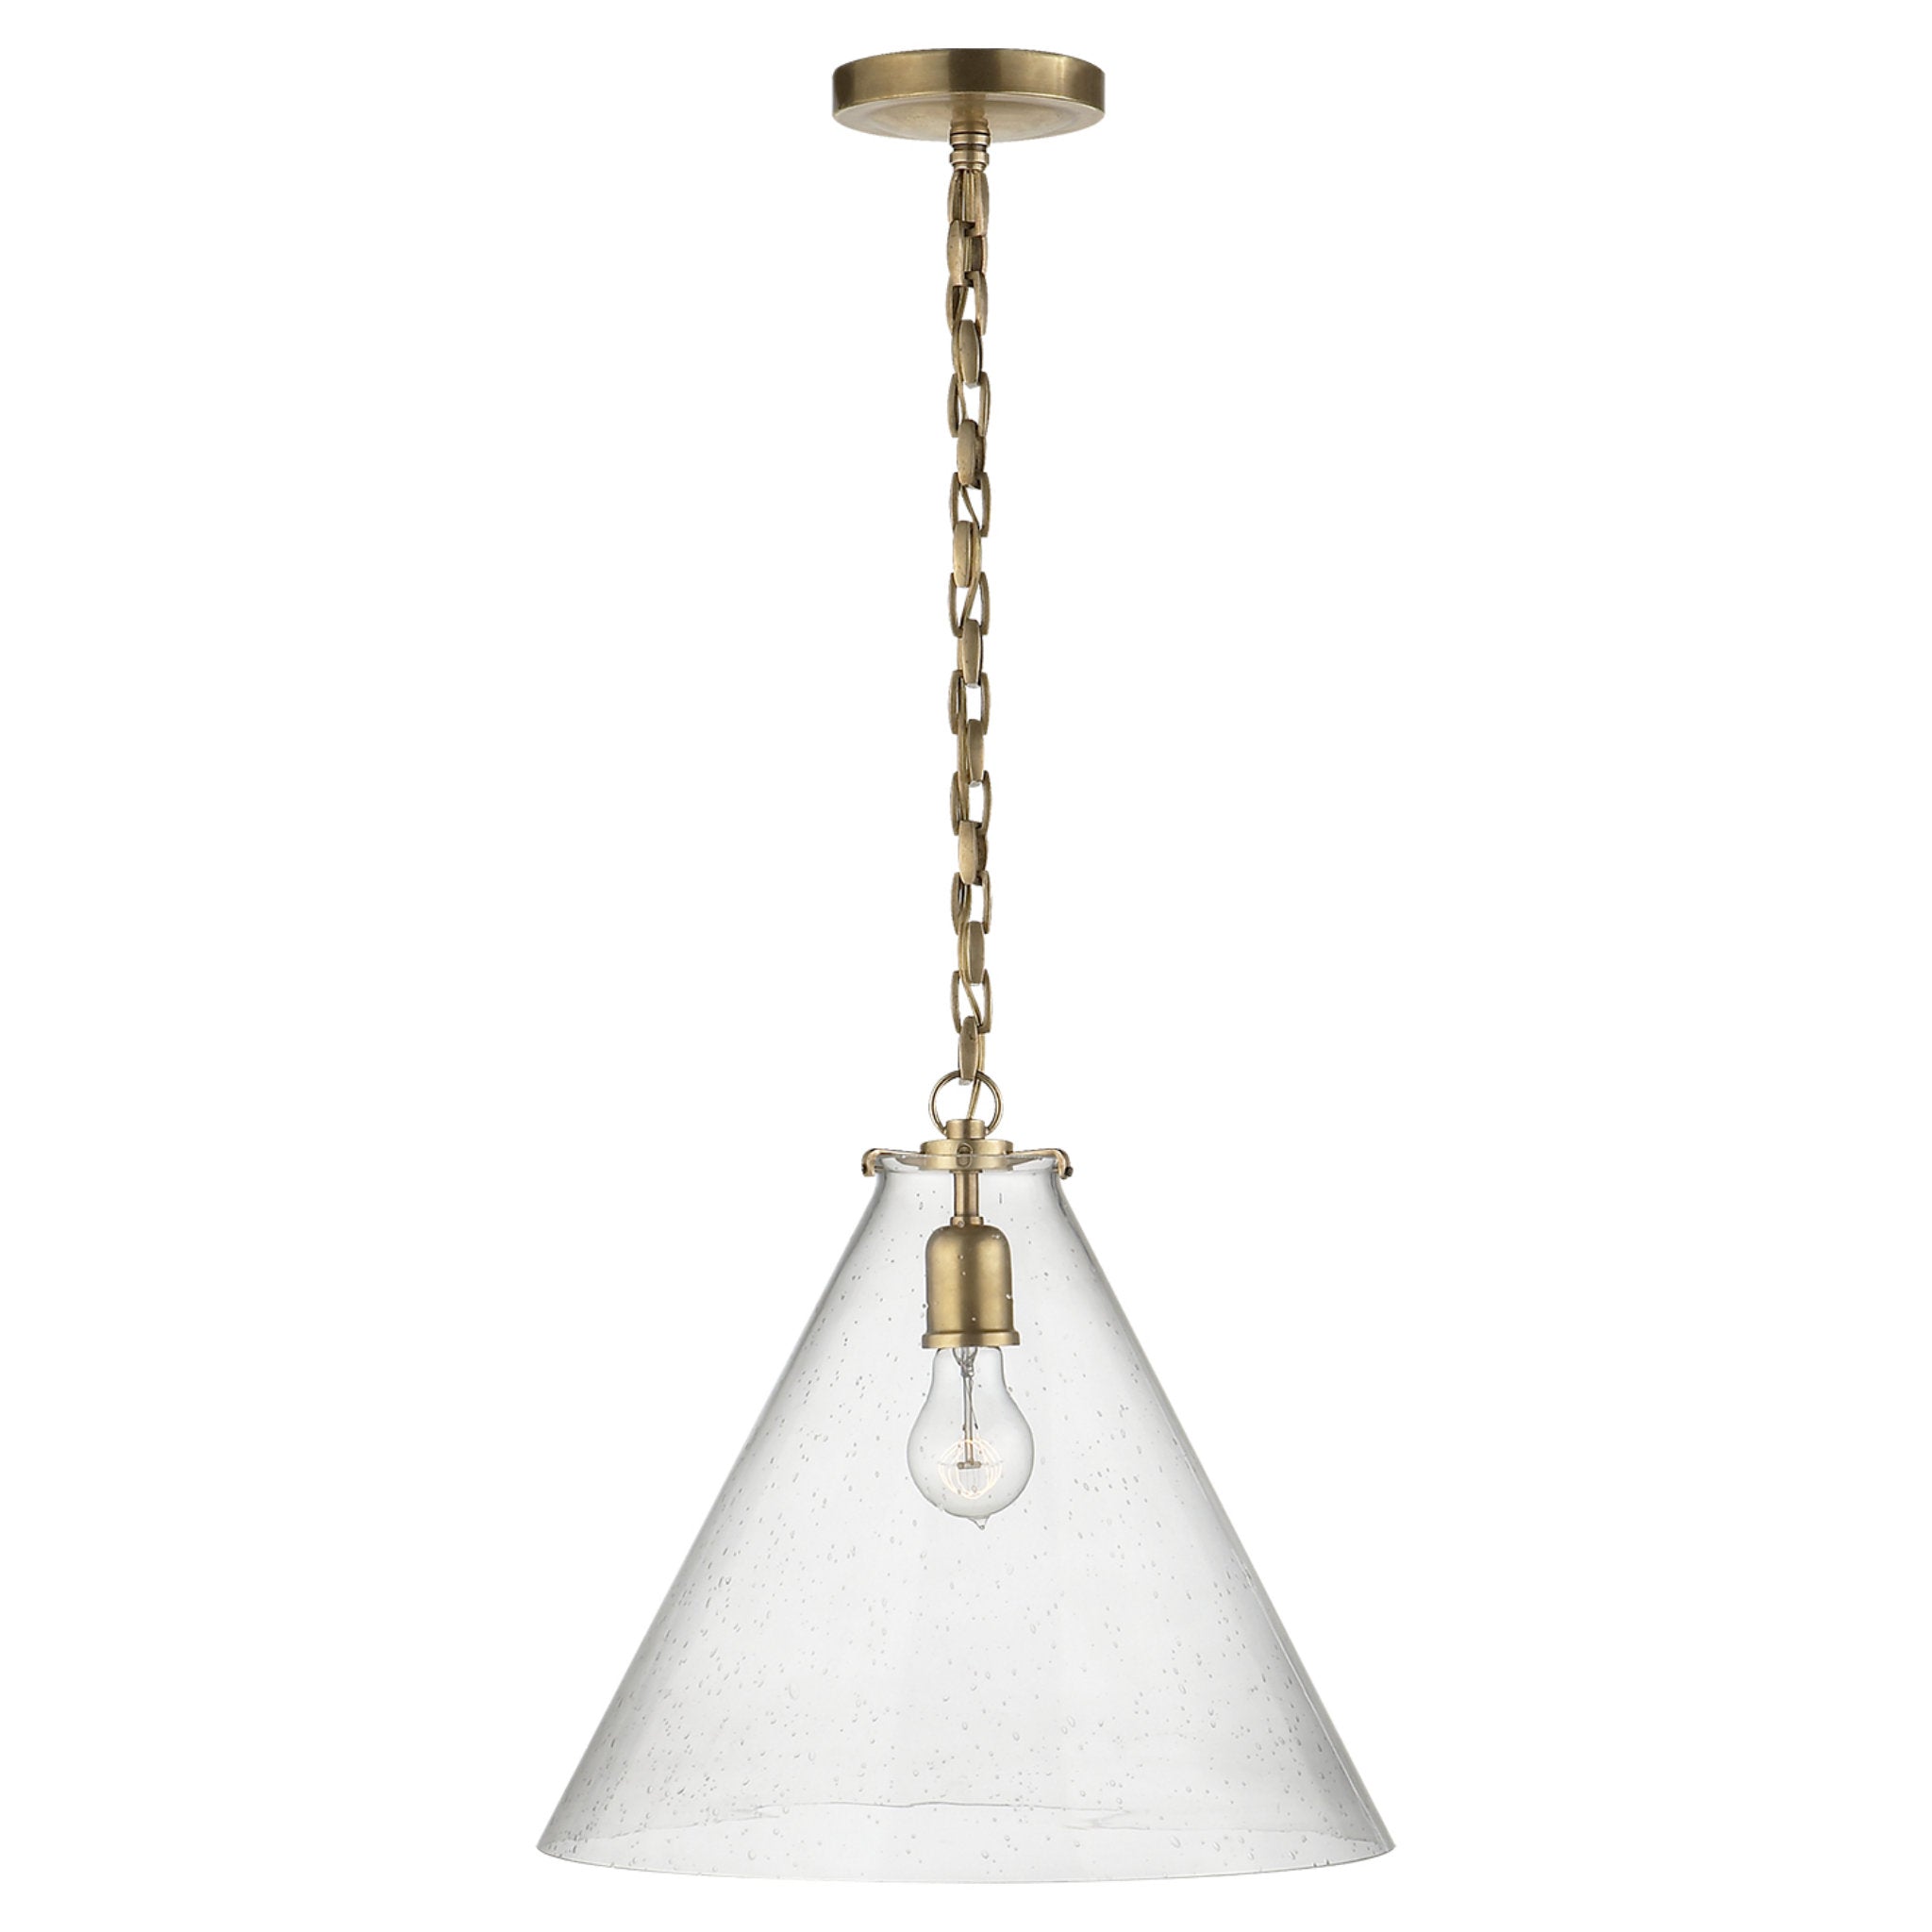 Thomas O'Brien Katie Conical Pendant in Hand-Rubbed Antique Brass with Seeded Glass